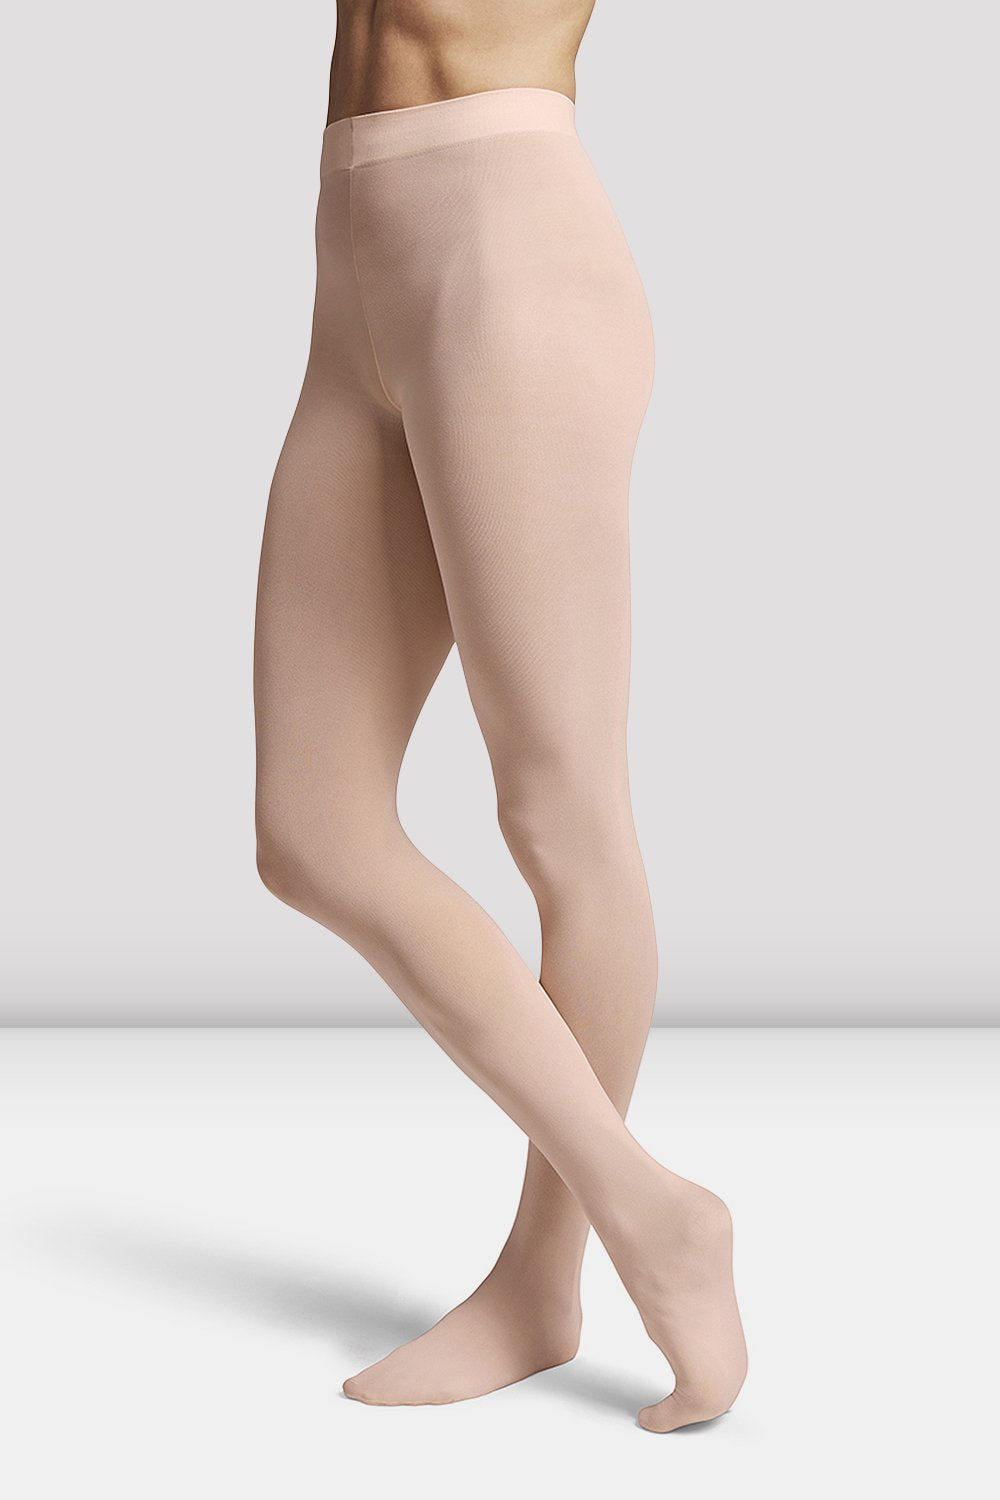 Girls Footed Tights, Salmon – BLOCH Dance US